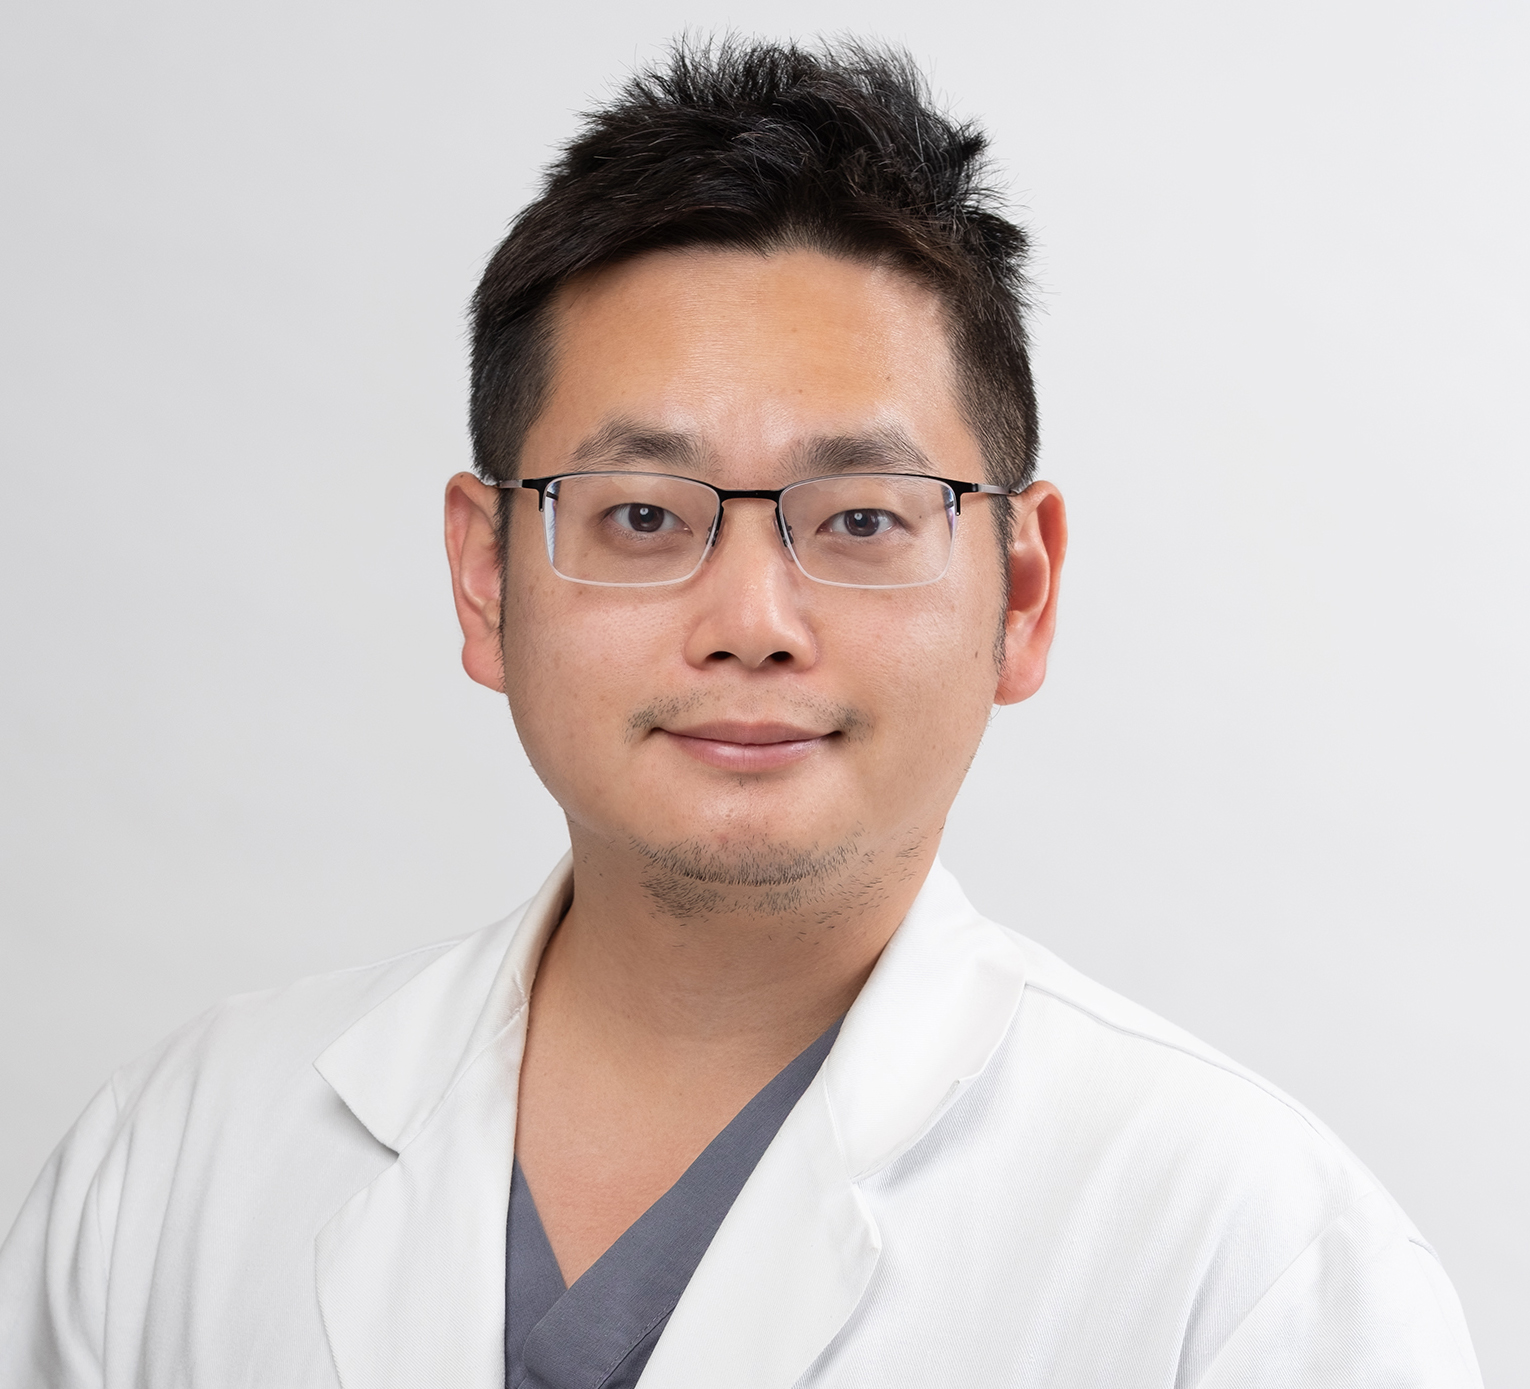 C.J. Jared Chen, MD, assistant professor in the Vivian L. Smith Department of Neurosurgery with McGovern Medical School at UTHealth Houston. (Photo provided by Chen)